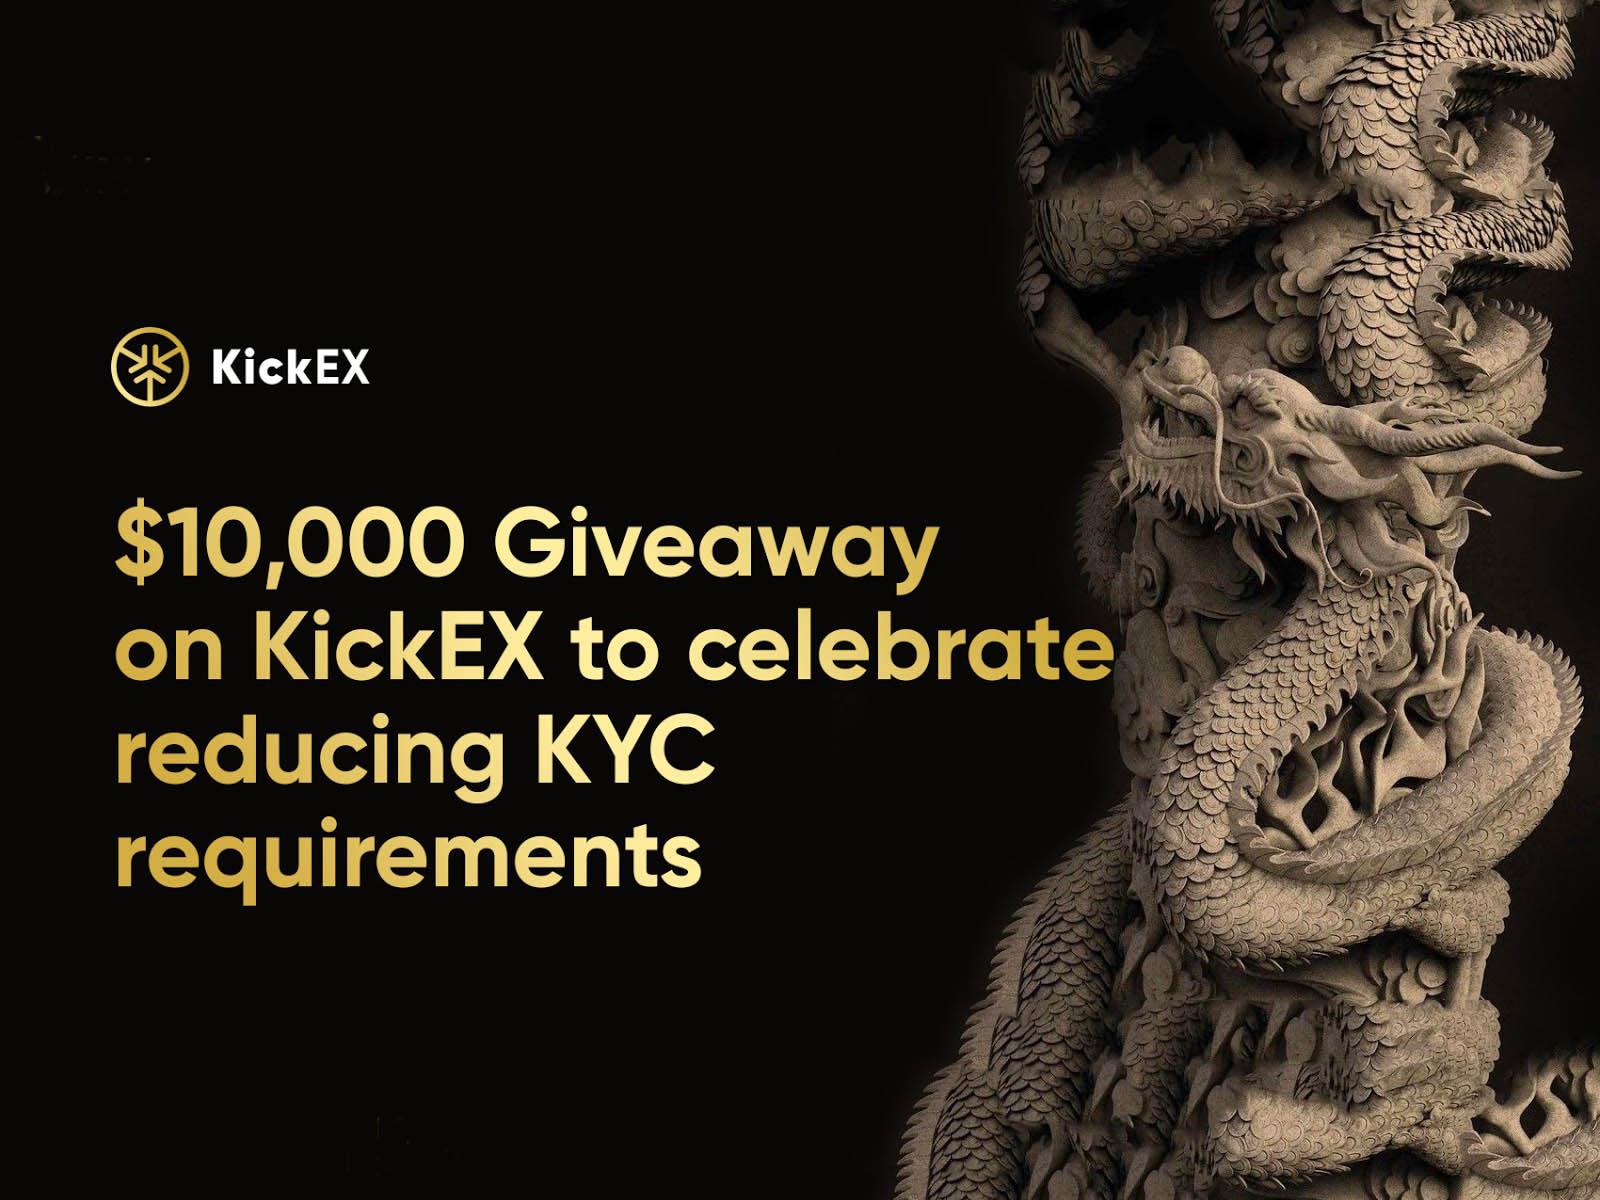 KickEX gives away $10,000 to celebrate the reduction of KYC requirements